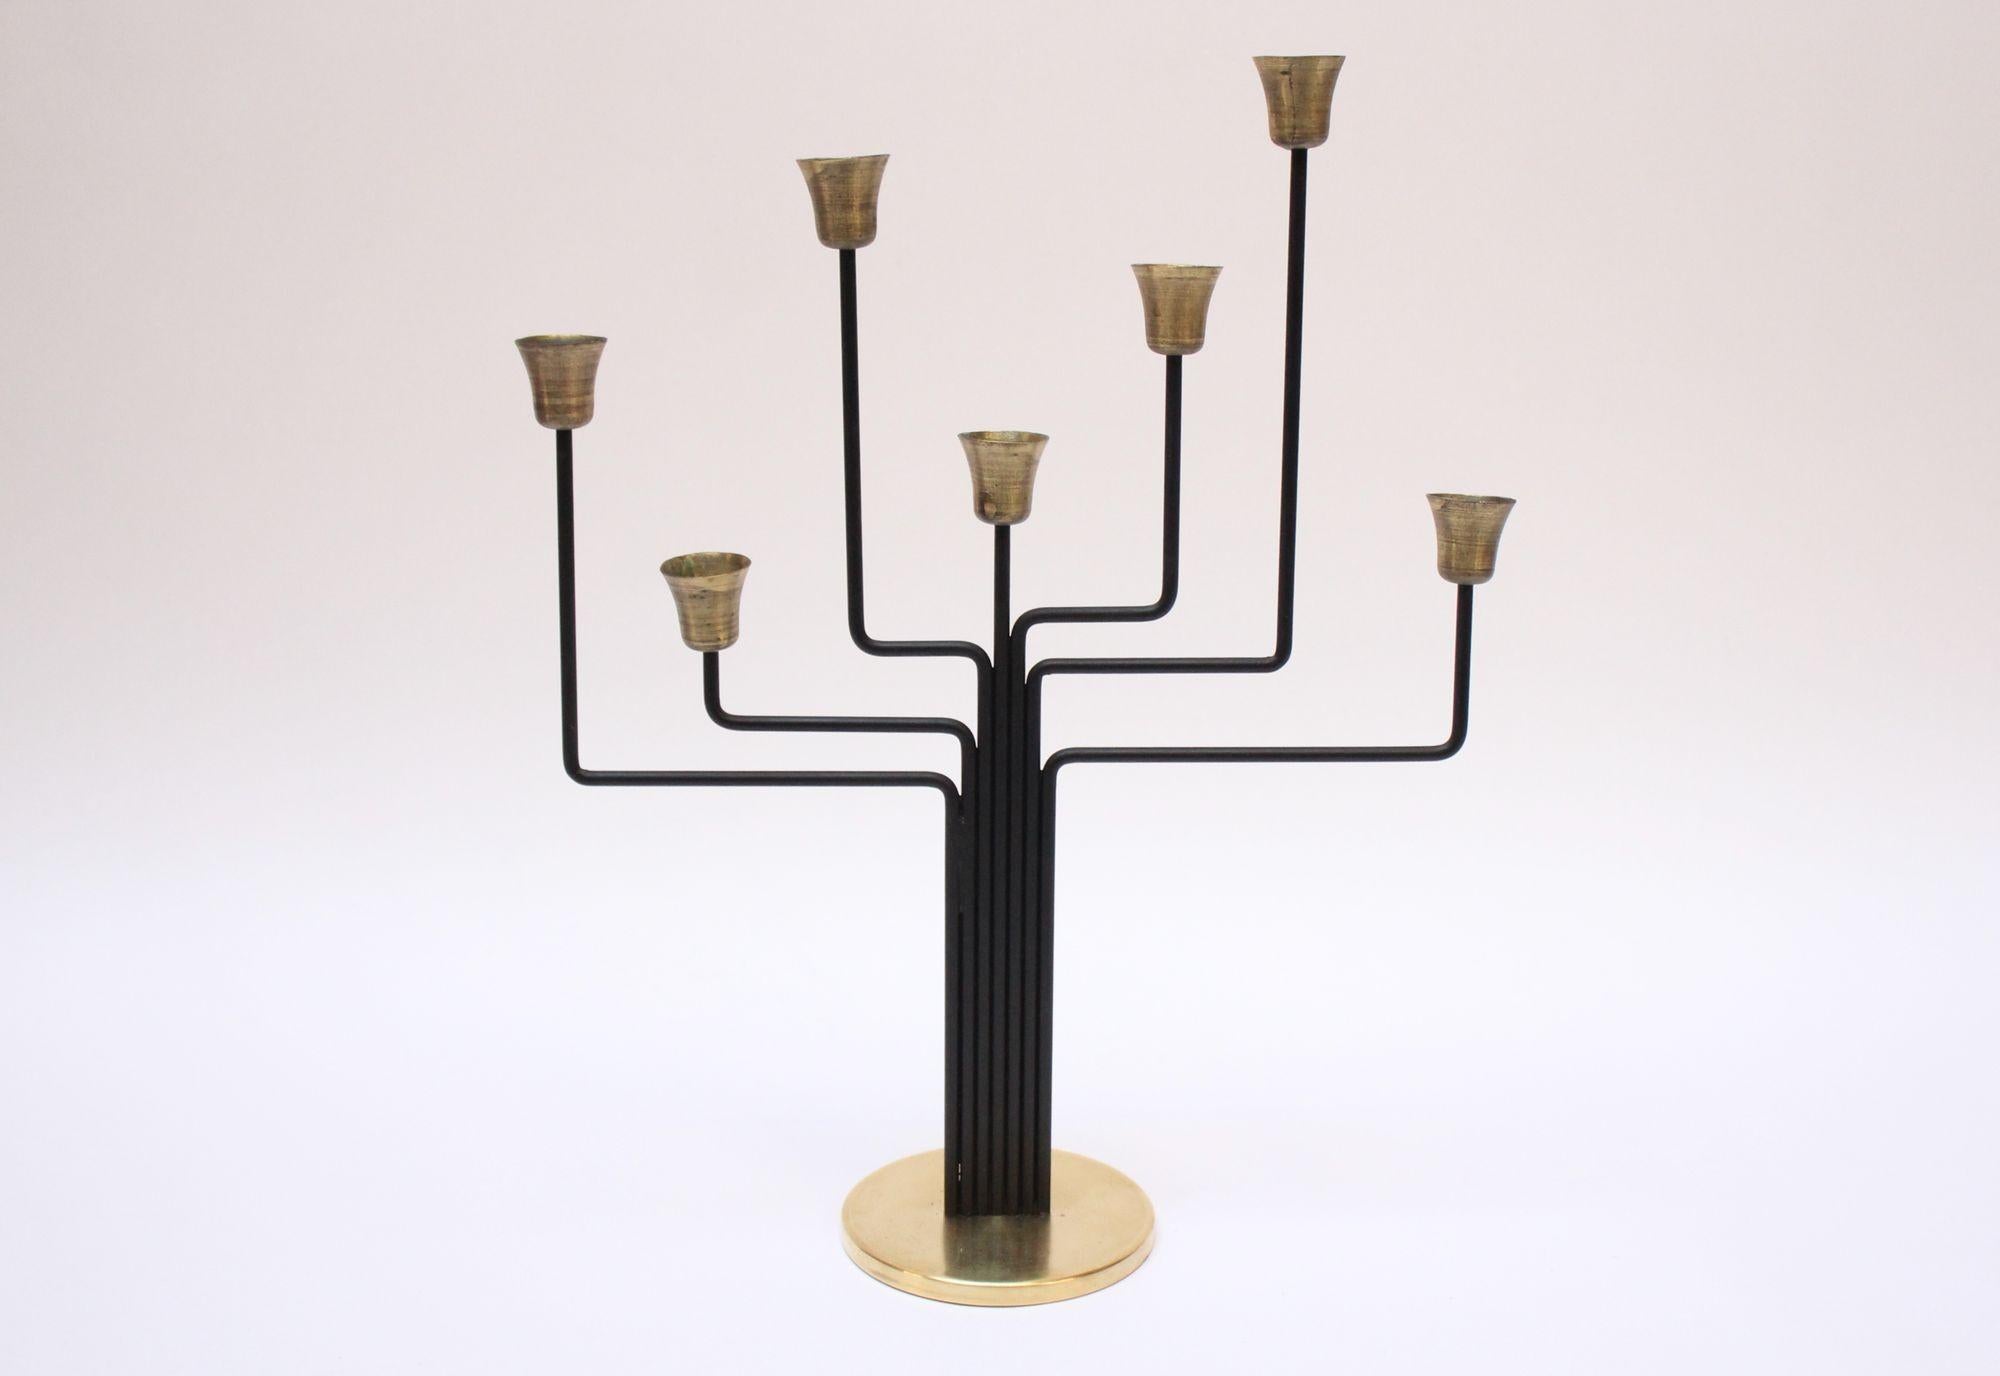 Sculptural seven-arm candelabrum designed by Svend Aage Holm Sørensen (ca. 1960s, Denmark). Composed of black lacquered metal 'branches' and brass circular base and candle cups. Tarnish to the unpolished candle holders and a few spots of tarnish to